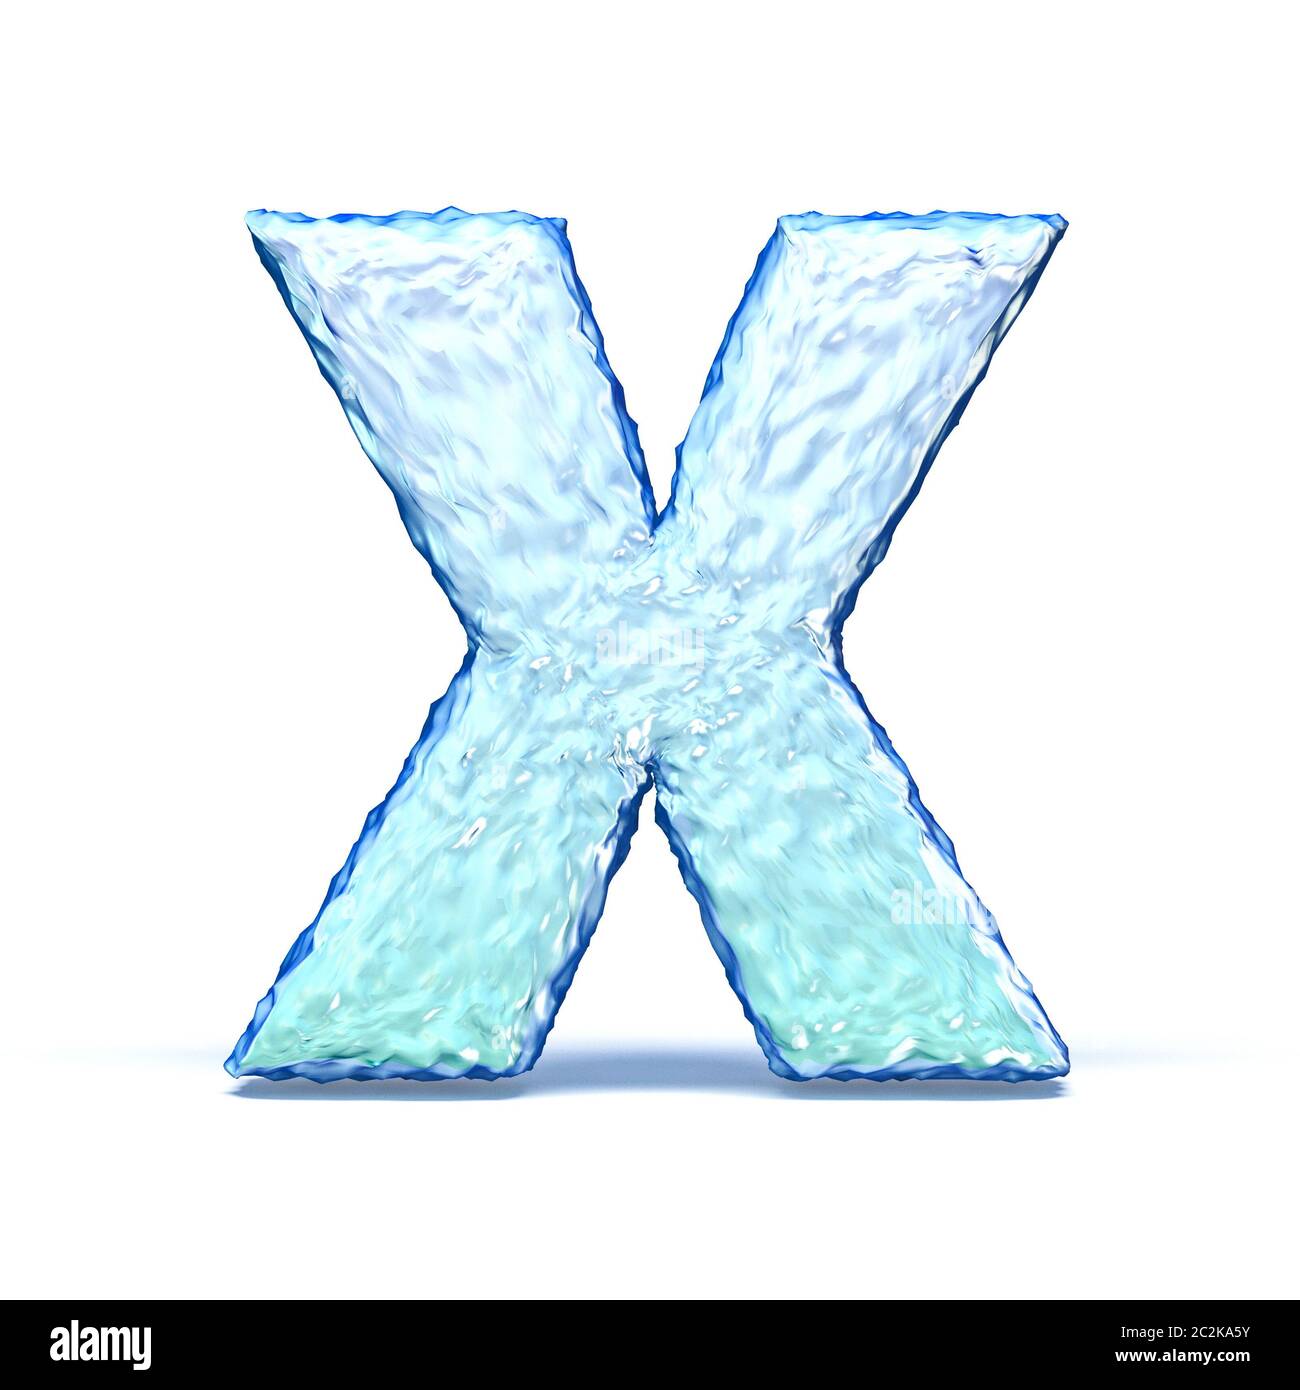 Ice crystal font letter X 3D render illustration isolated on white background Stock Photo